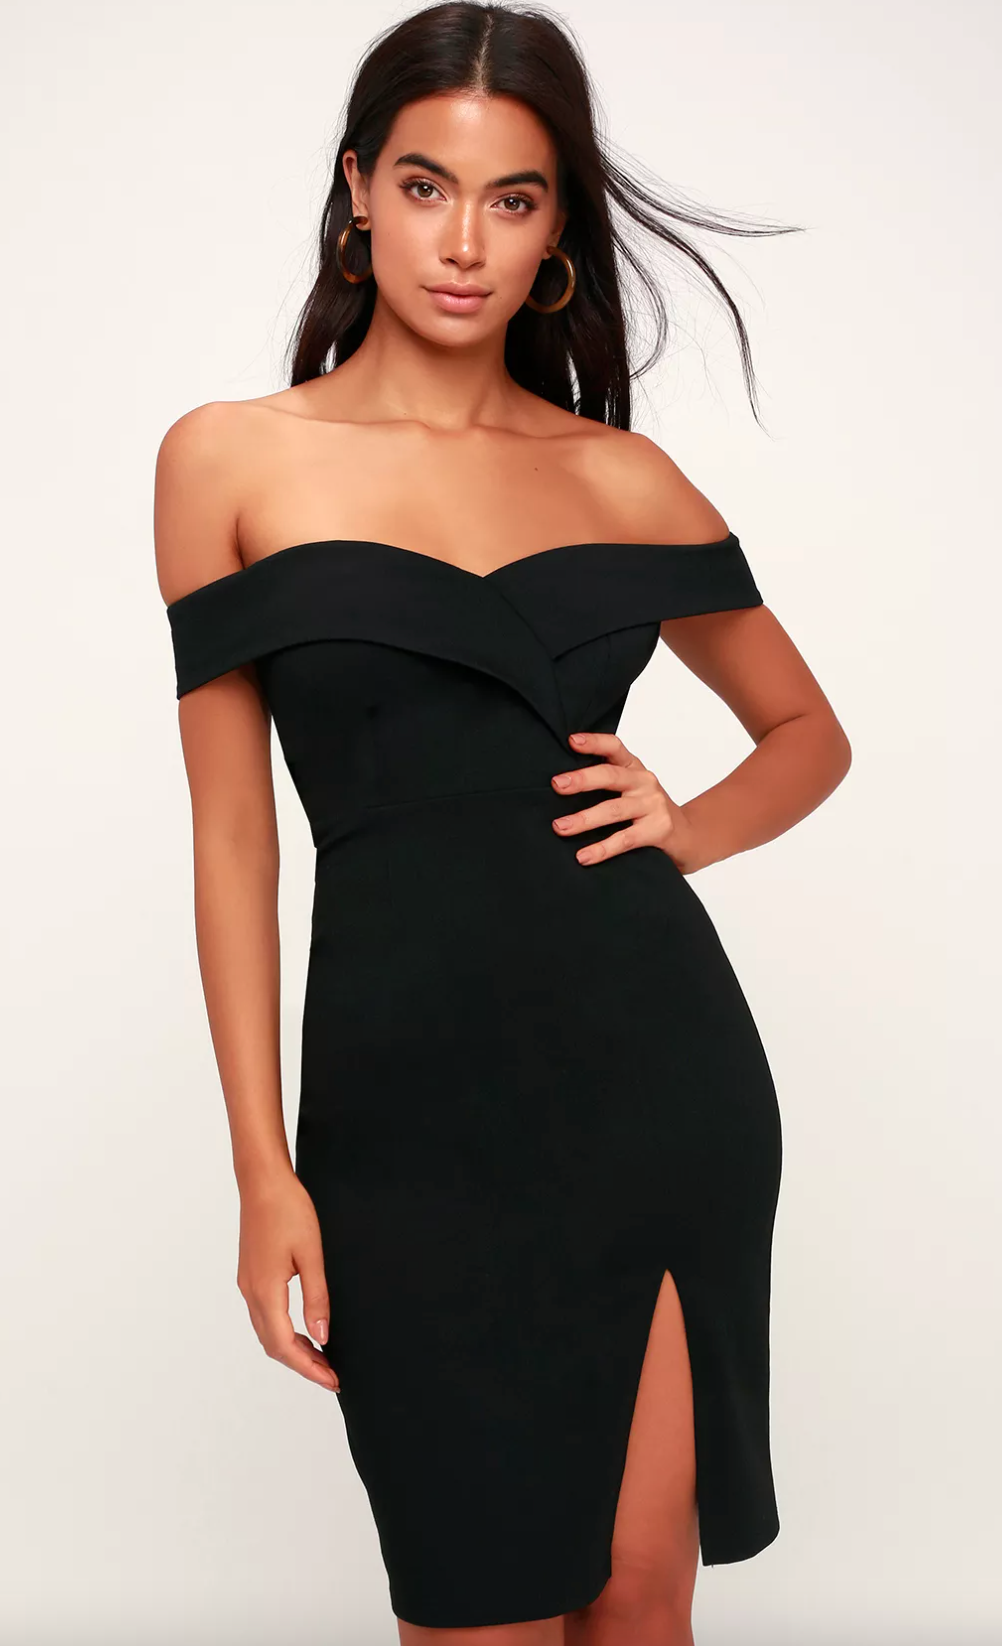 Off-the-shoulder chic black dress from Lulu's